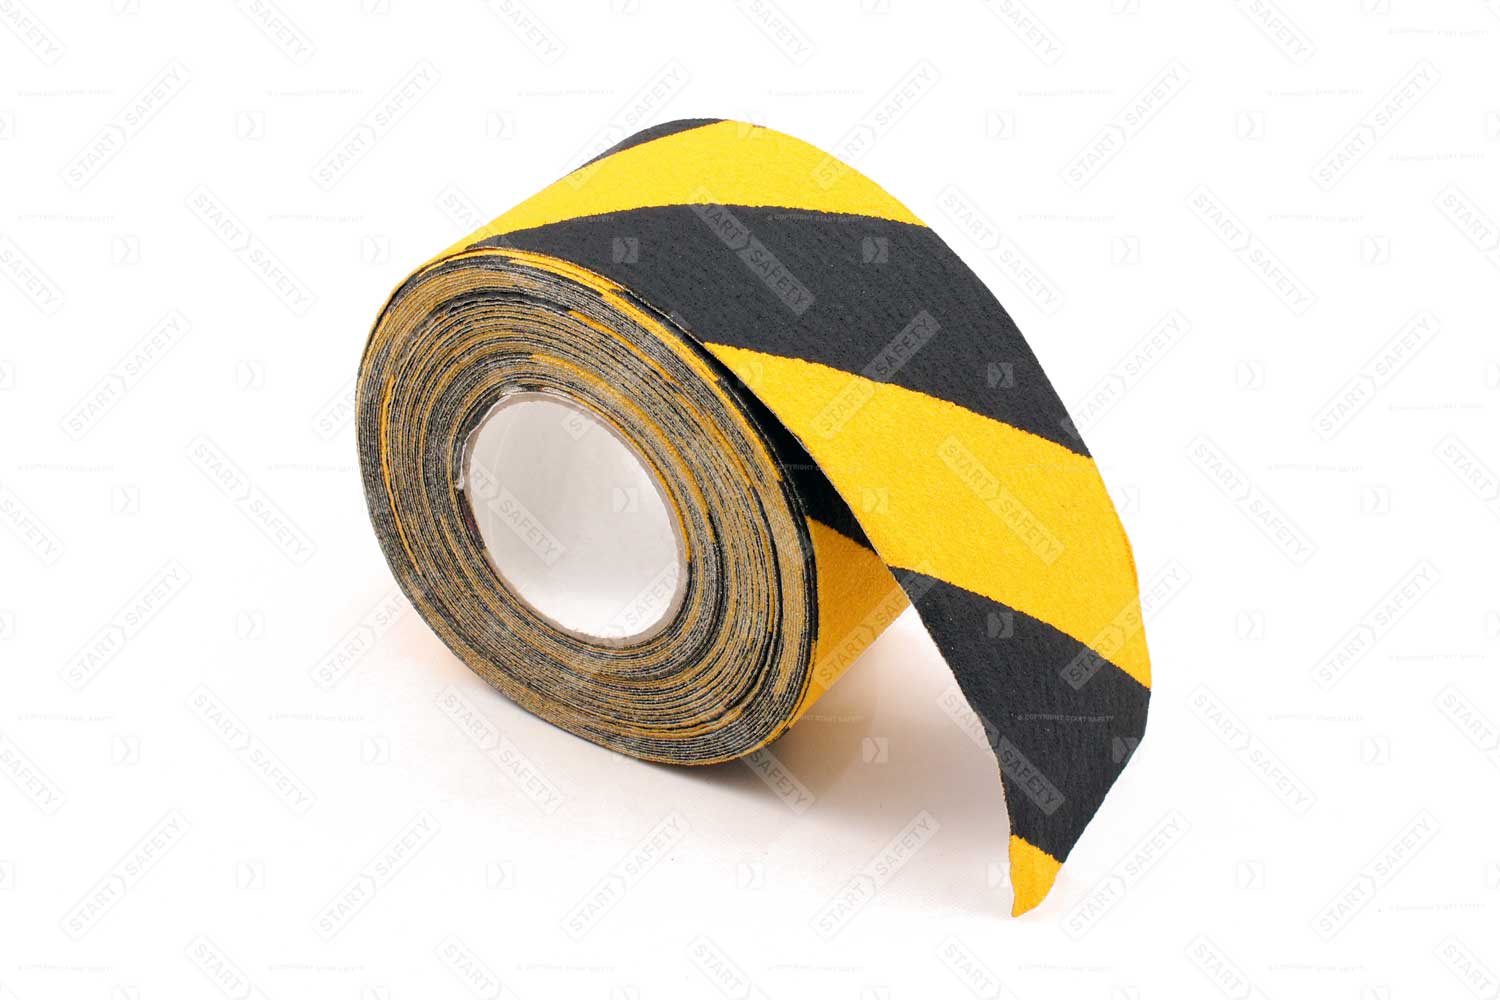 Industrial strength conformable non-slip tape